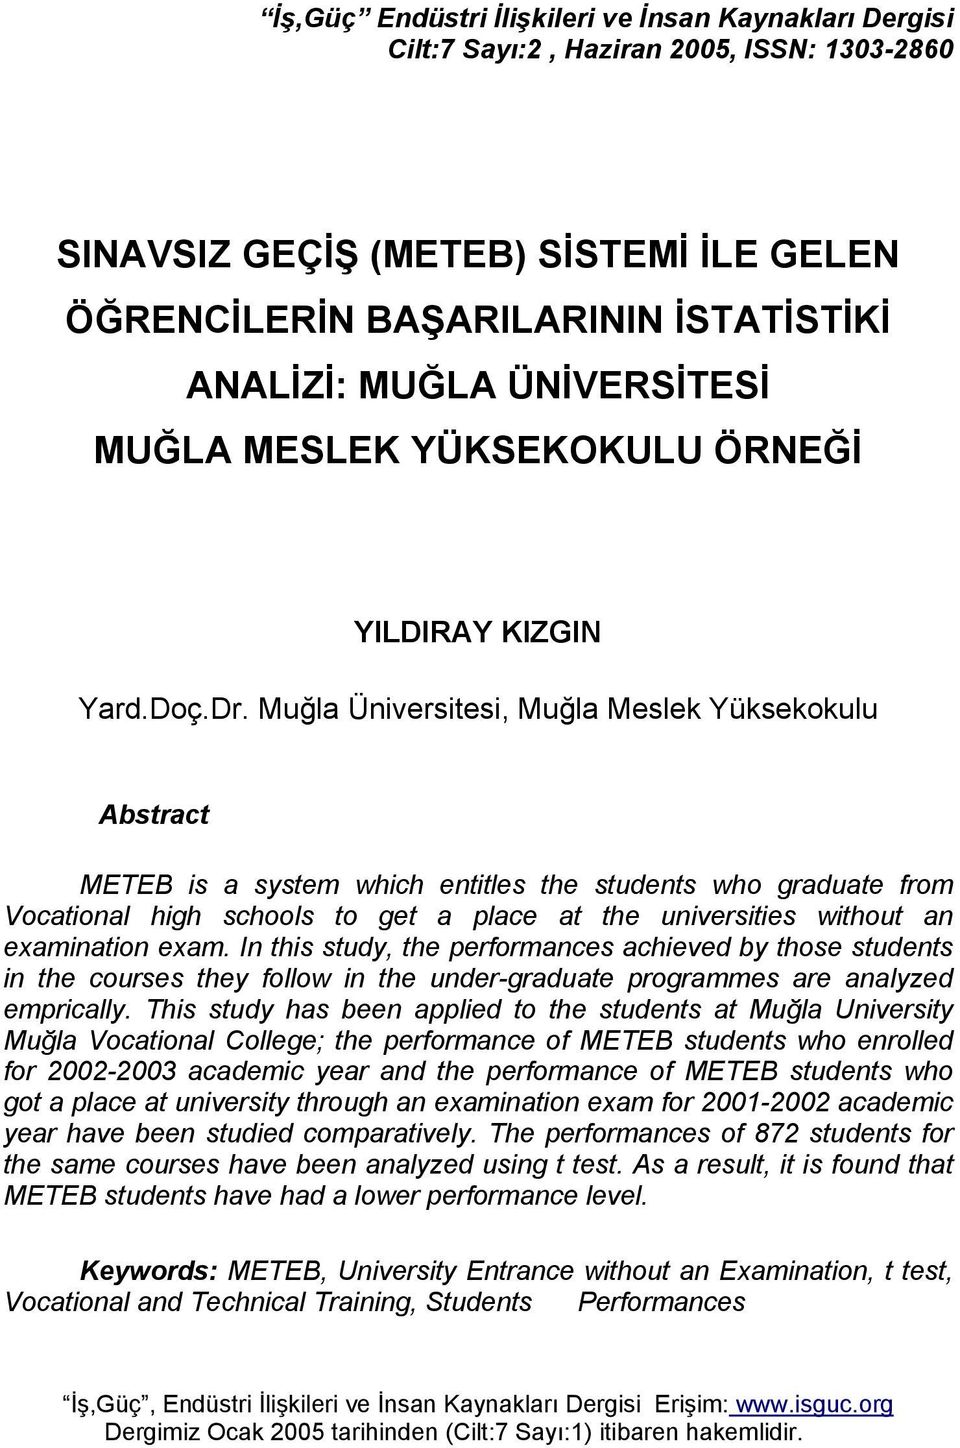 Muğla Üniversitesi, Muğla Meslek Yüksekokulu Abstract METEB is a system which entitles the students who graduate from Vocational high schools to get a place at the universities without an examination